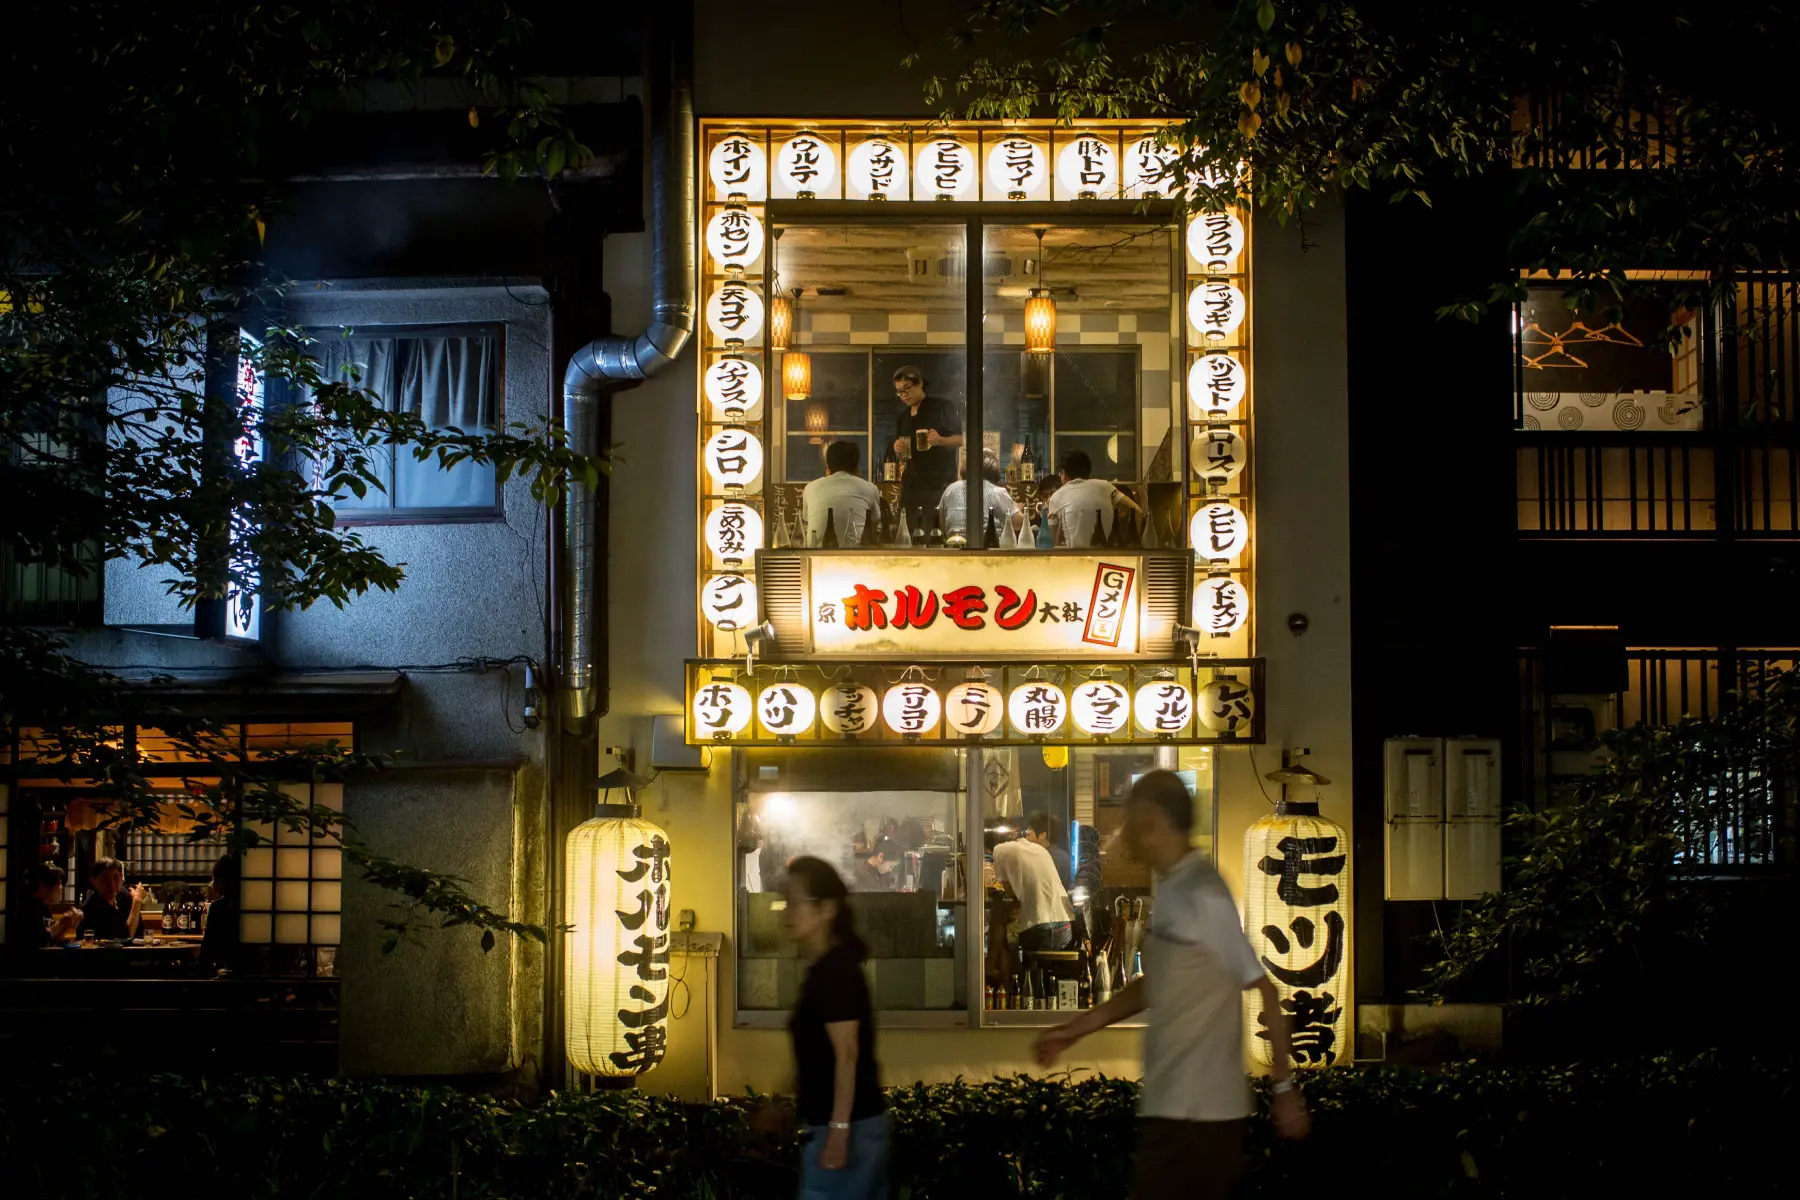 An illuminated two-floor restaurant operating at night in Kyoto